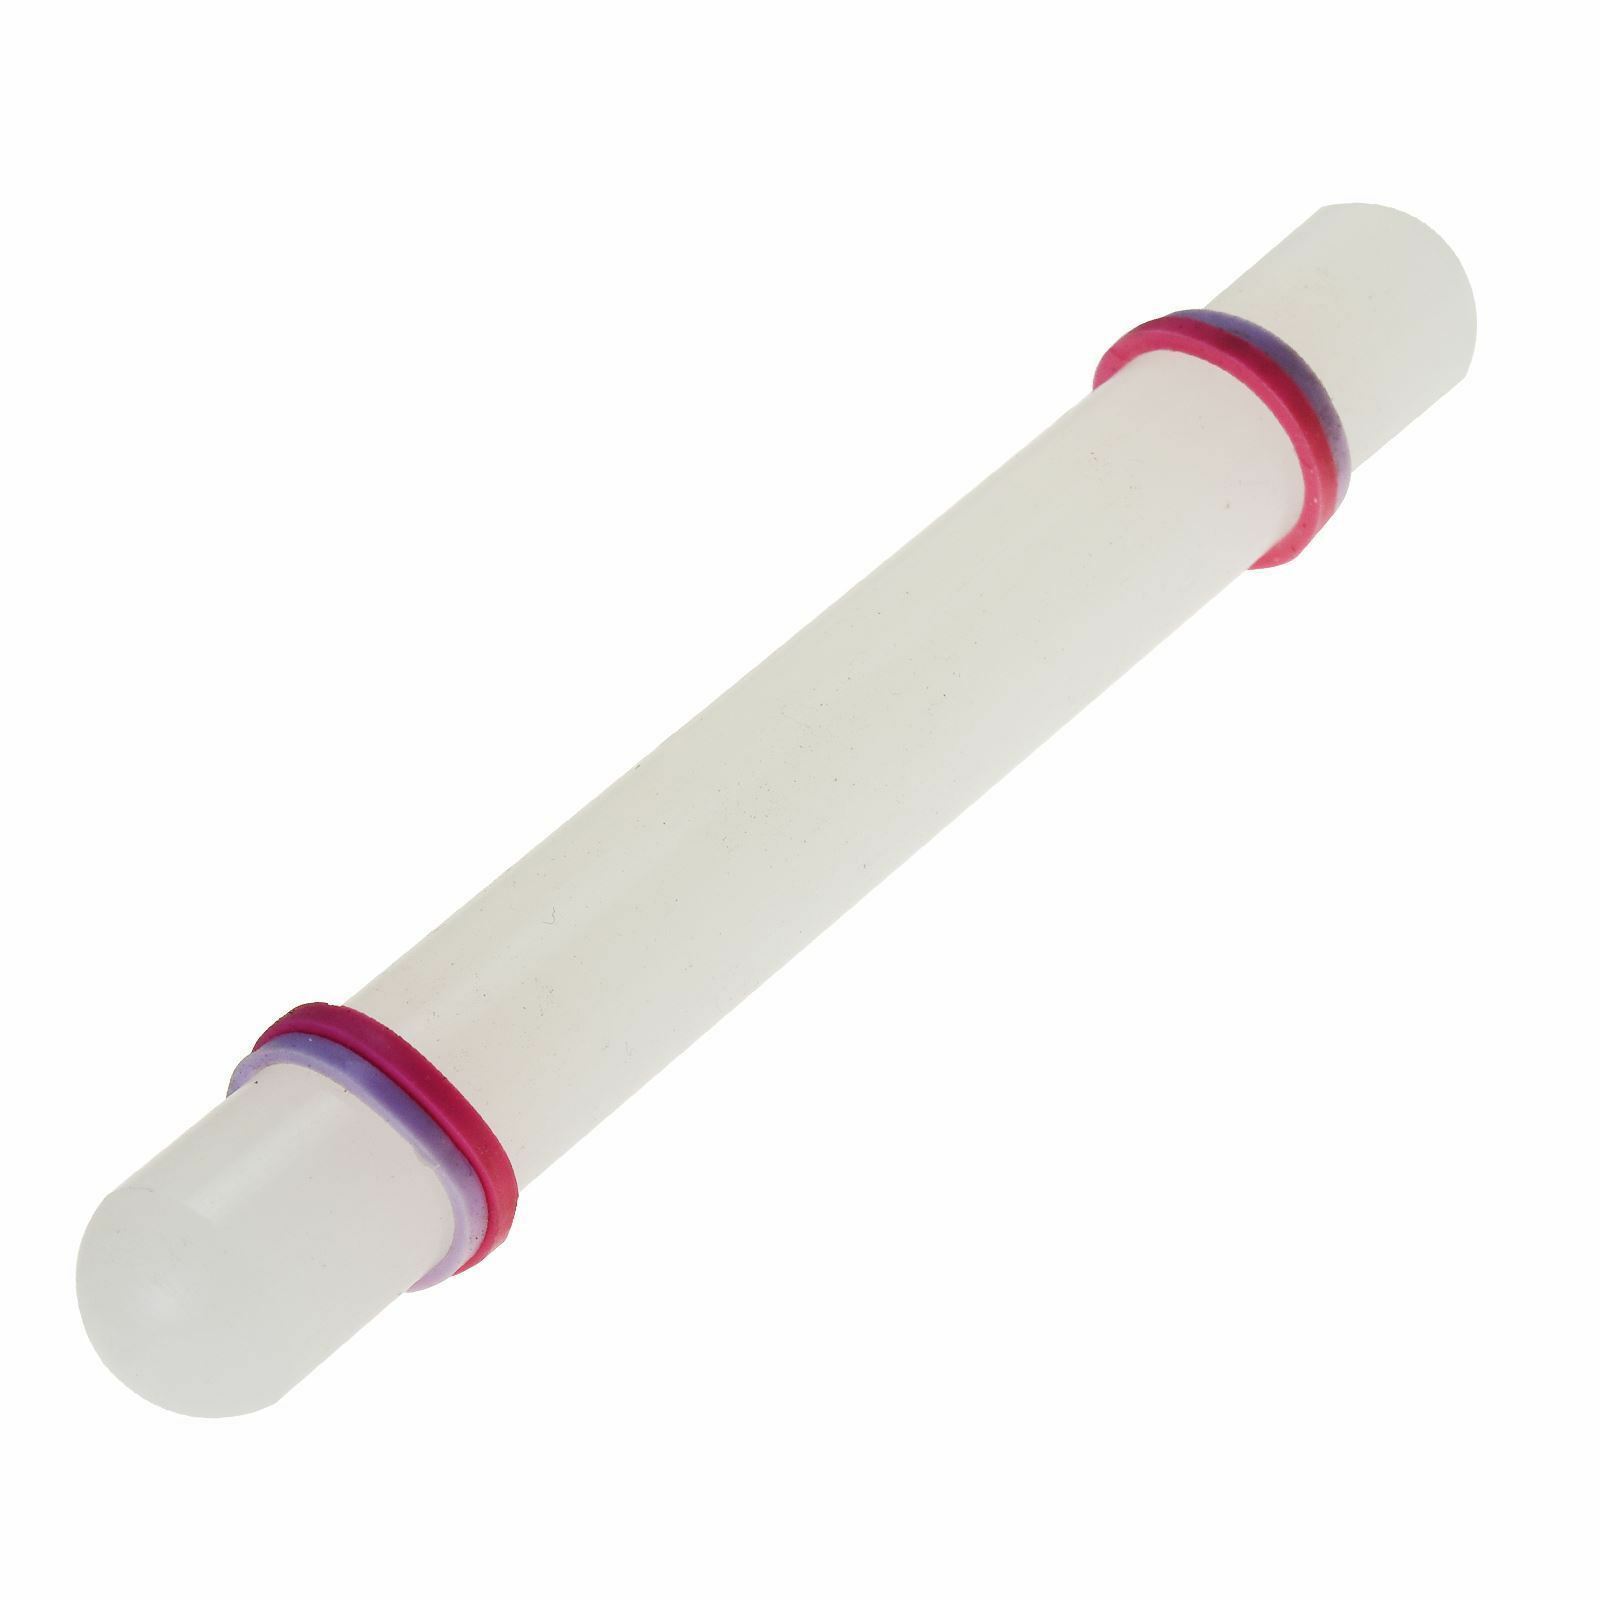 attachment-https://www.cupcakeaddicts.co.uk/wp-content/uploads/imported/7/Variation-of-Plastic-Rolling-Pin-8-Various-sizes-Cake-Pastry-UK-SELLER-Same-day-dispatch-323097813287-3abf.jpg